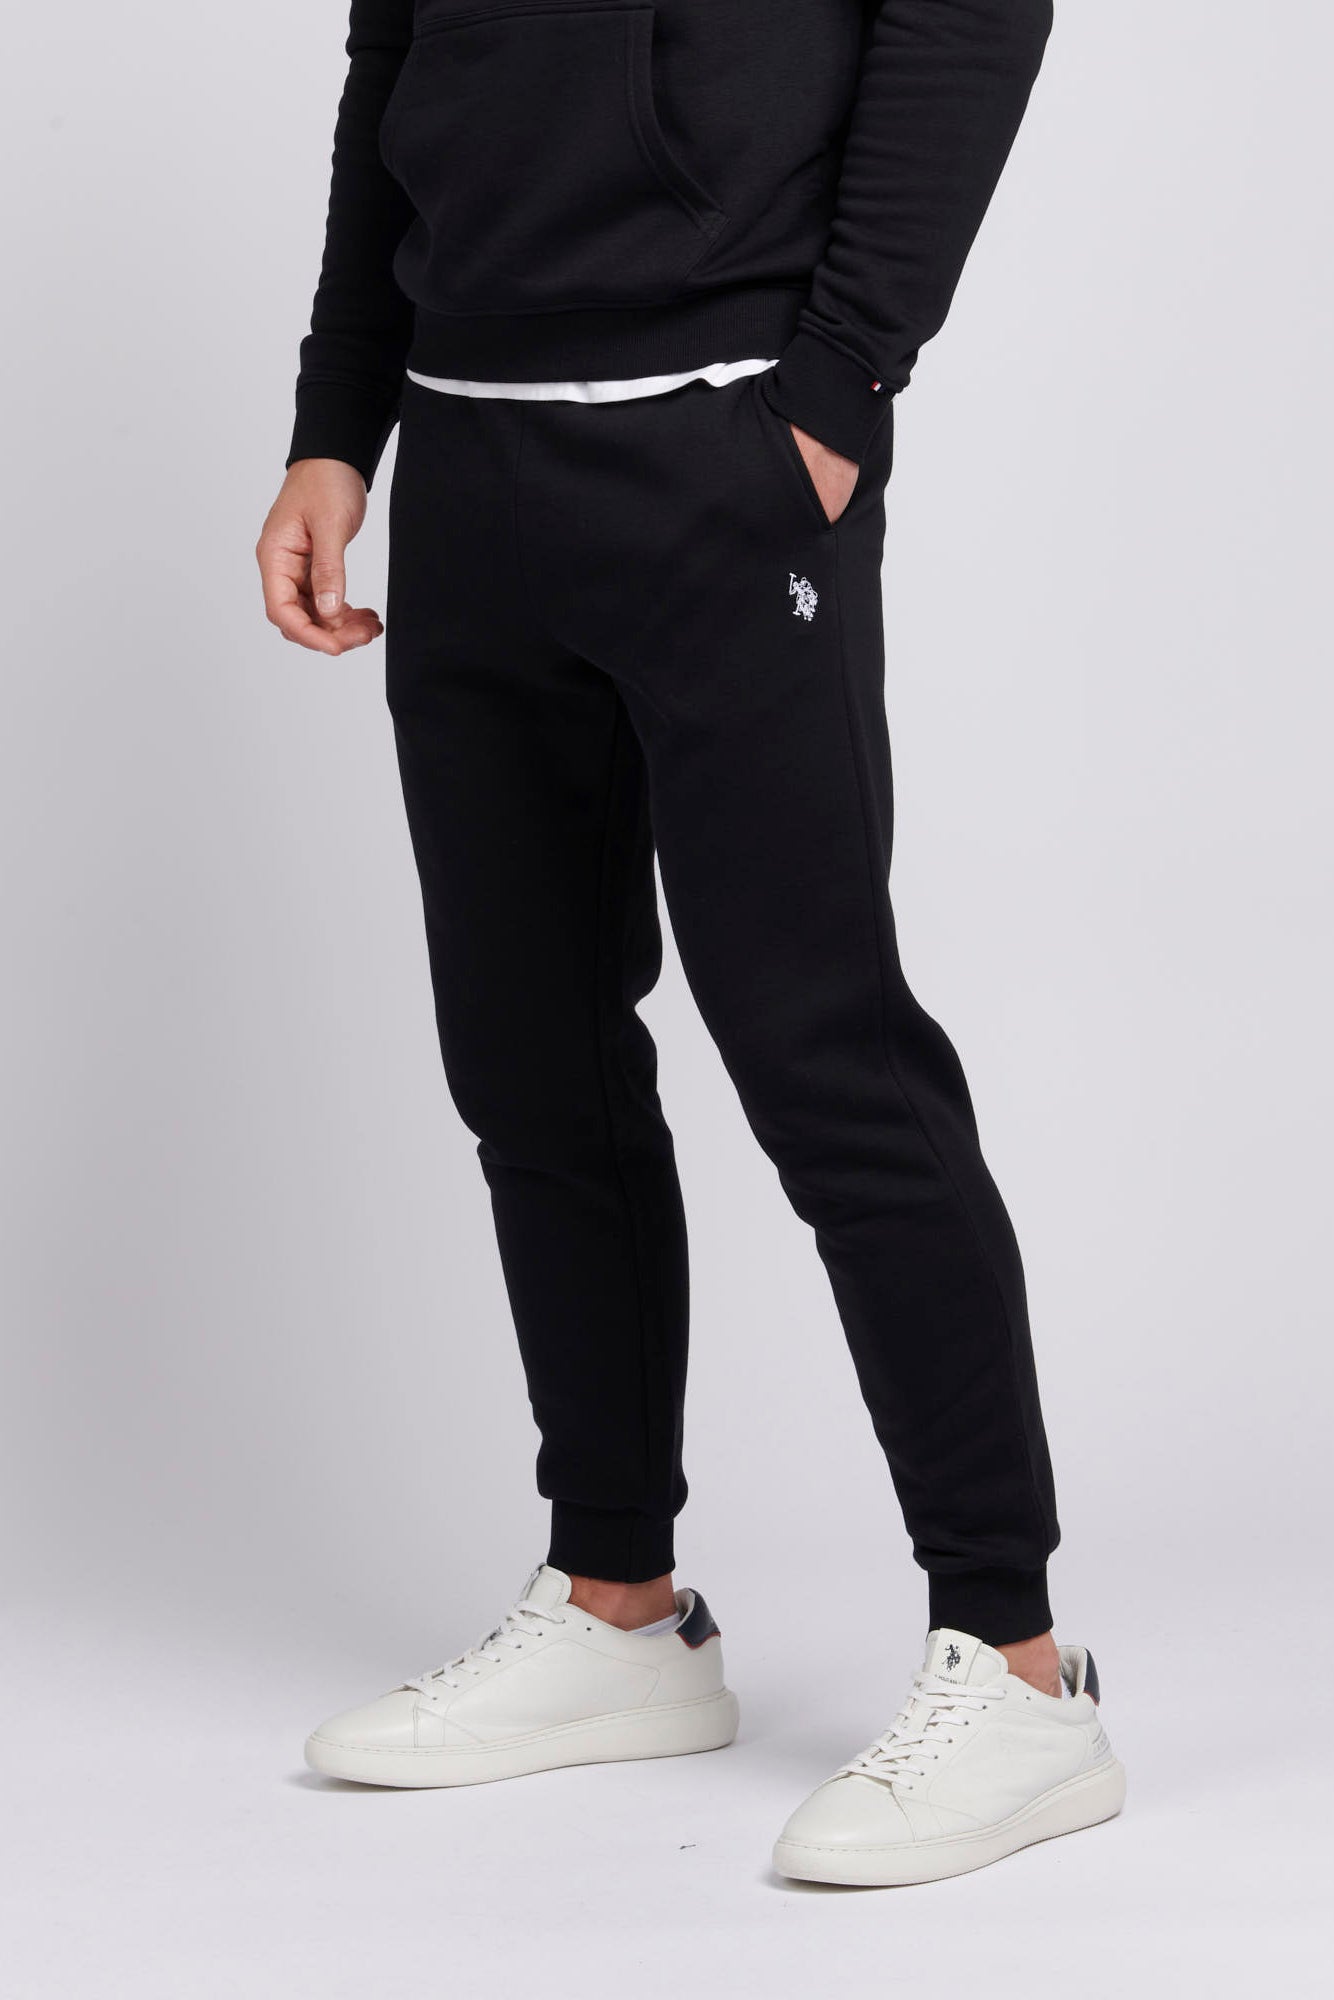 Mens Classic Fit Double Horsemen Joggers in Black Bright White DHM